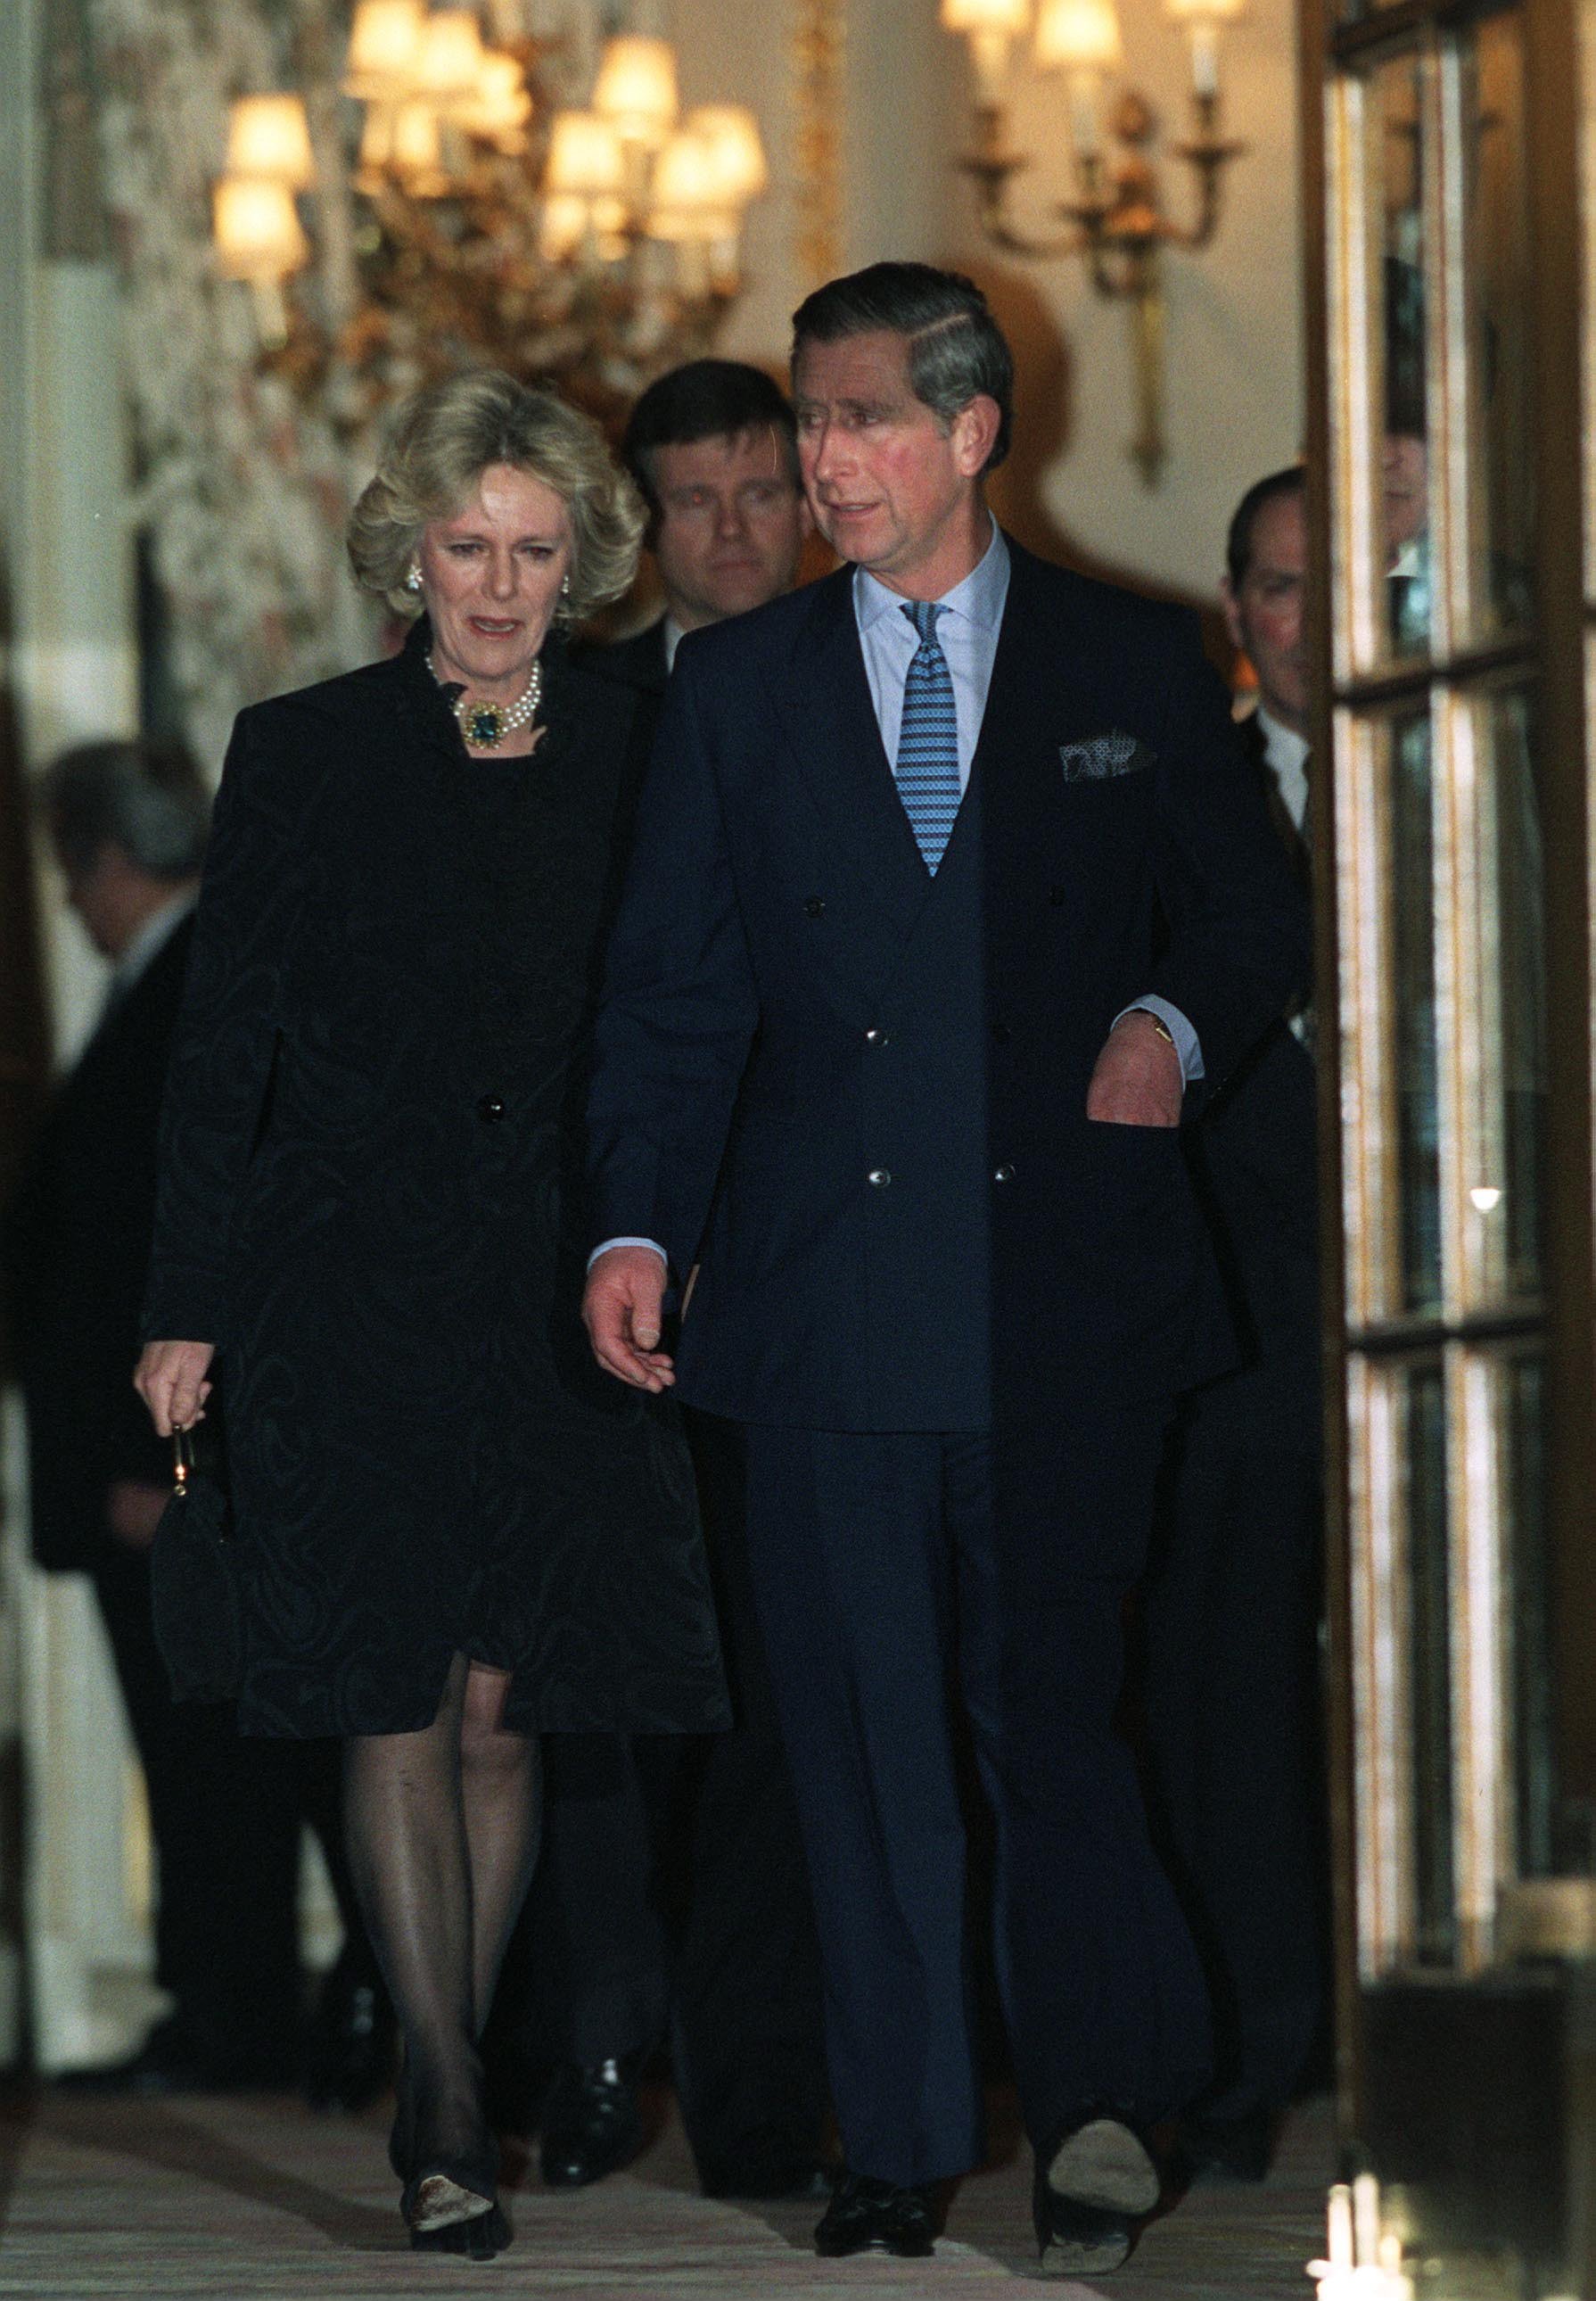 Prince Charles and Camilla Parker-Bowles leaving The Ritz Hotel in London after attending the 50th birthday party of Camilla's sister on January 28, 1999 | Source: Getty Images